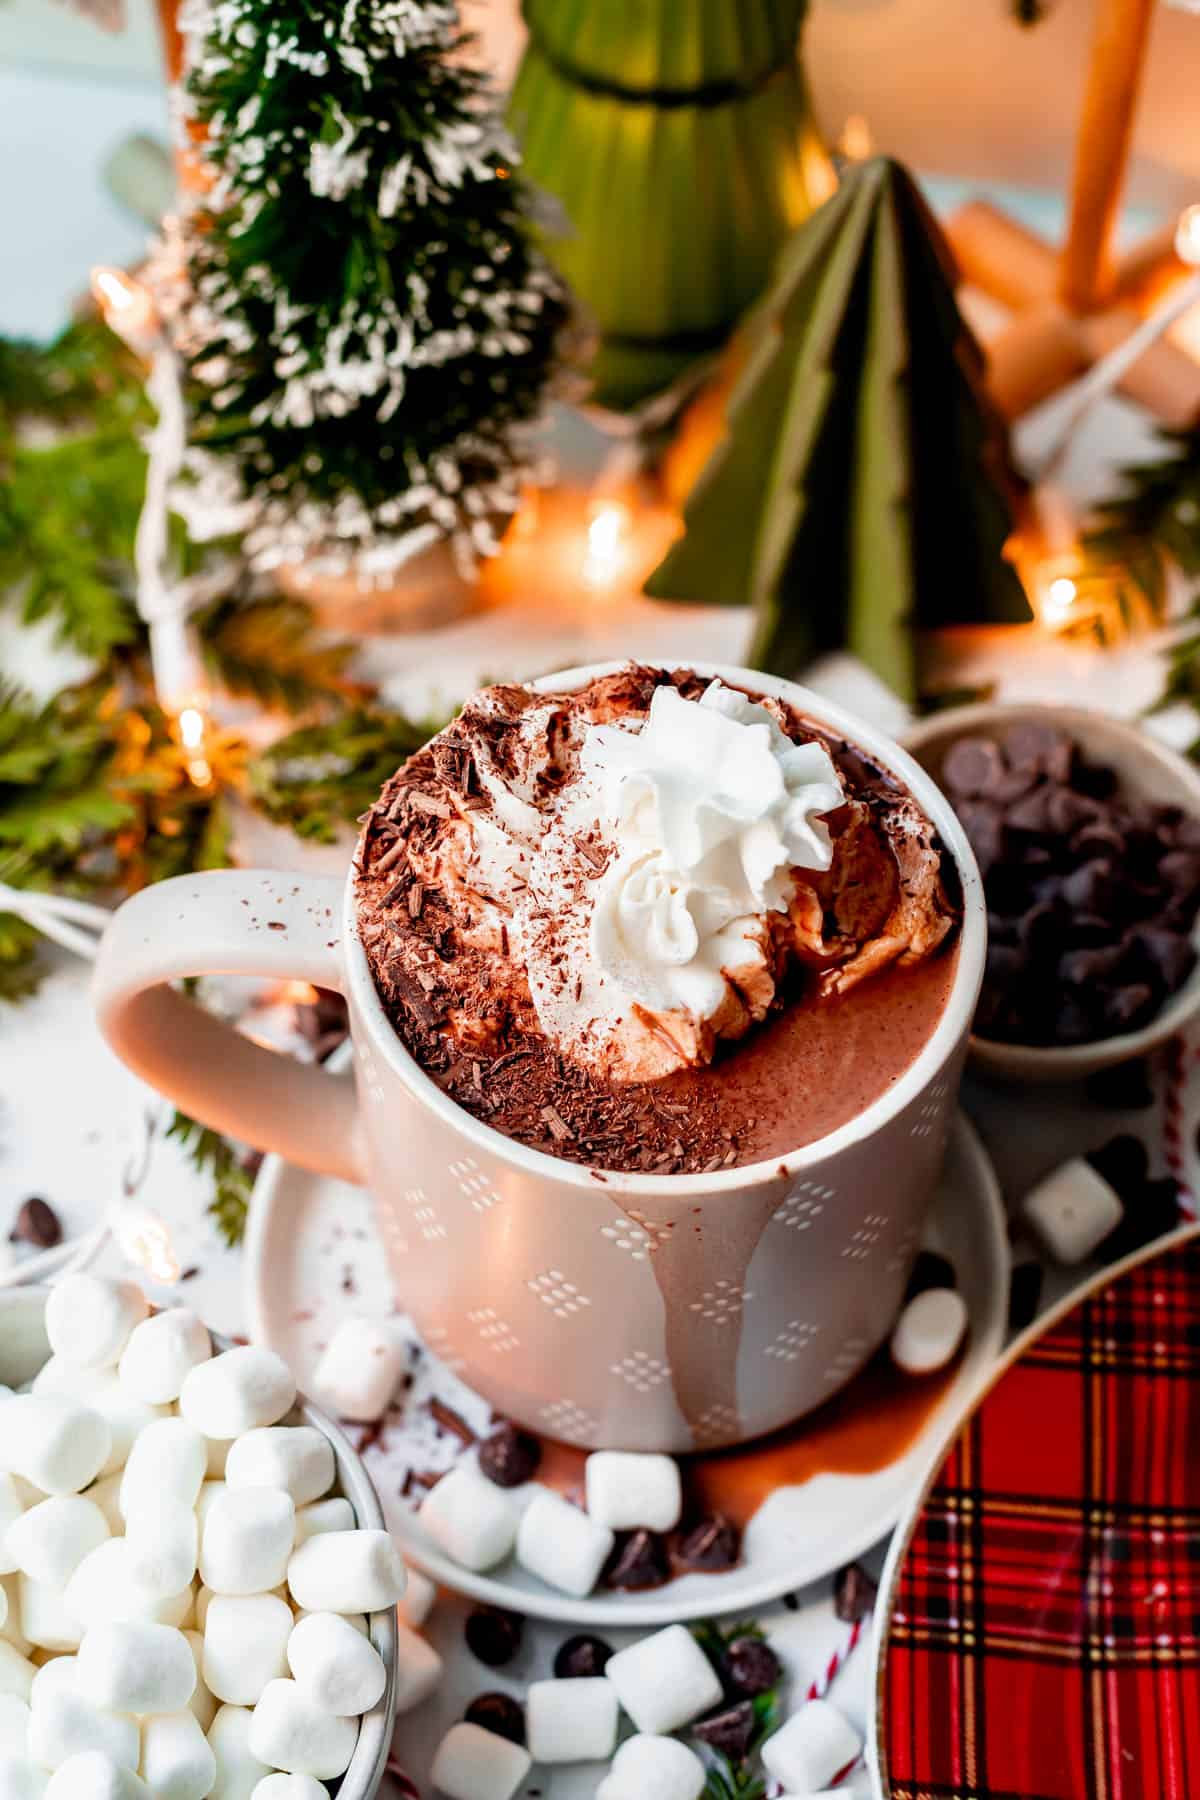 a mug of homemade hot chocolate on a table with marshmallows, chocolate chips, and mini Christmas trees.